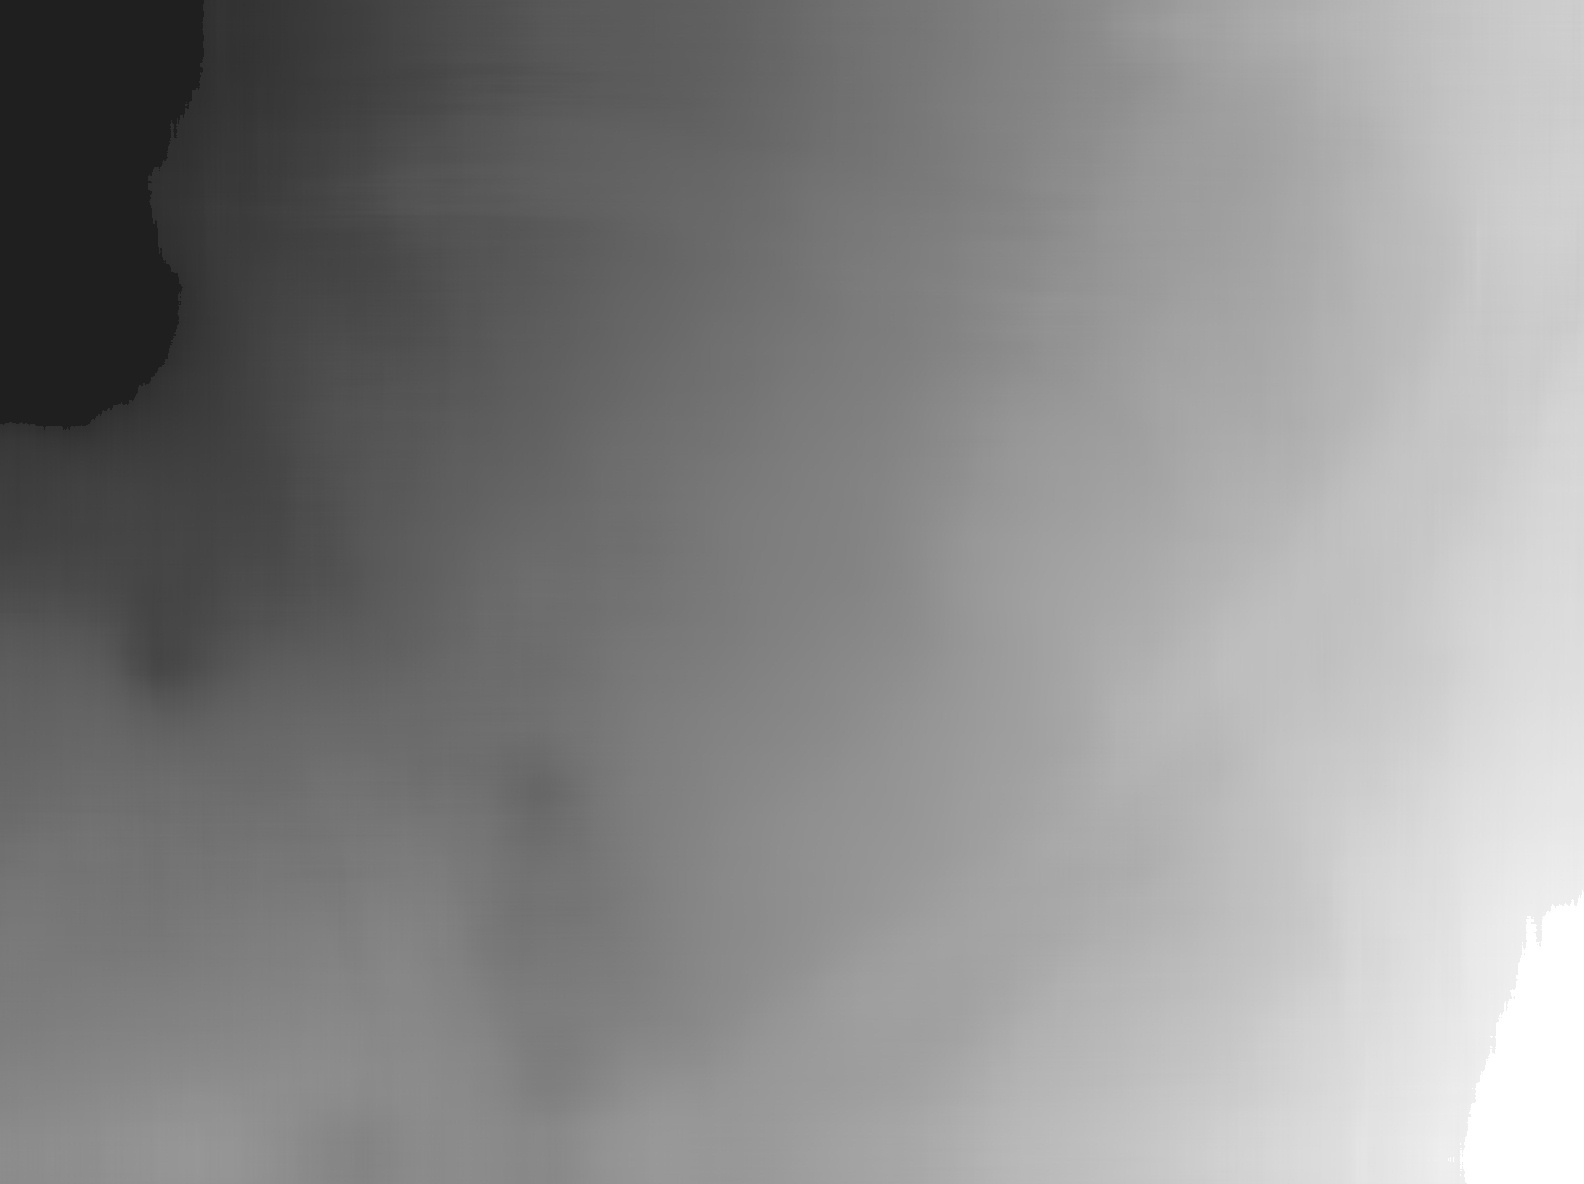 Nasa's Mars rover Curiosity acquired this image using its Mars Hand Lens Imager (MAHLI) on Sol 2132